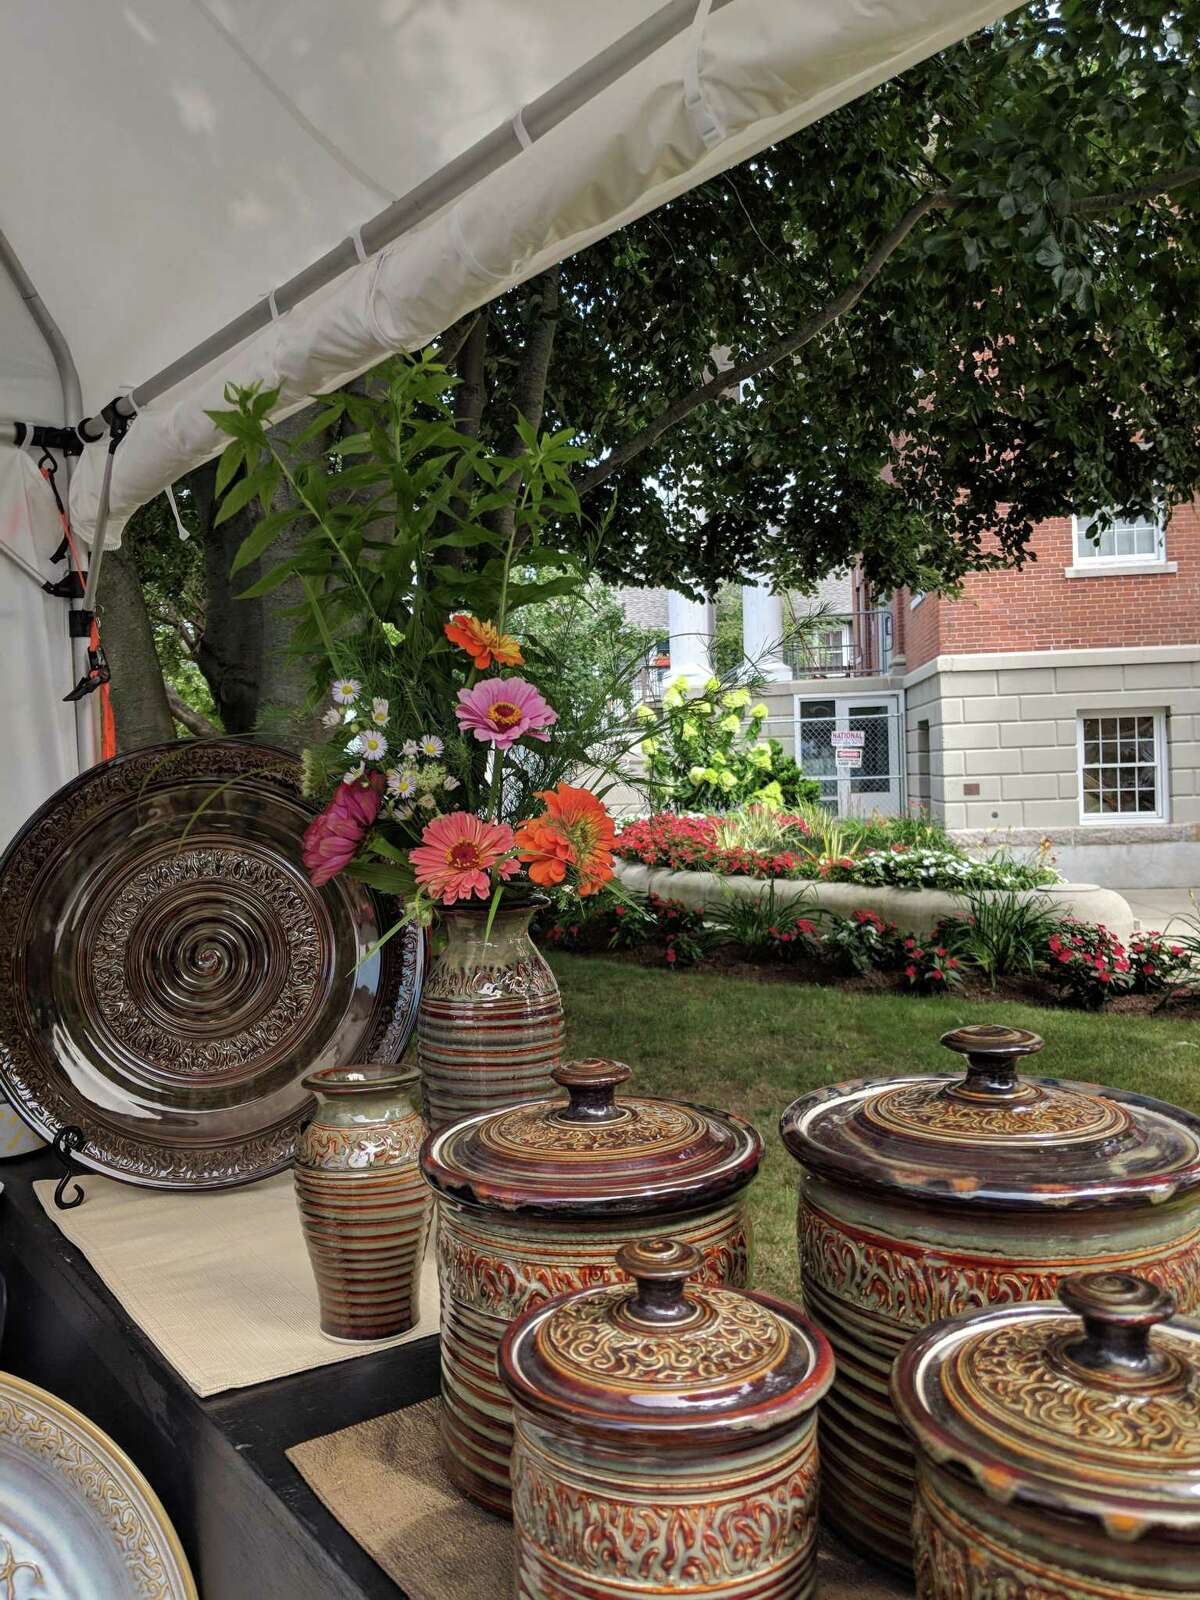 Old Saybrook chamber’s arts, crafts festival to feature array of works